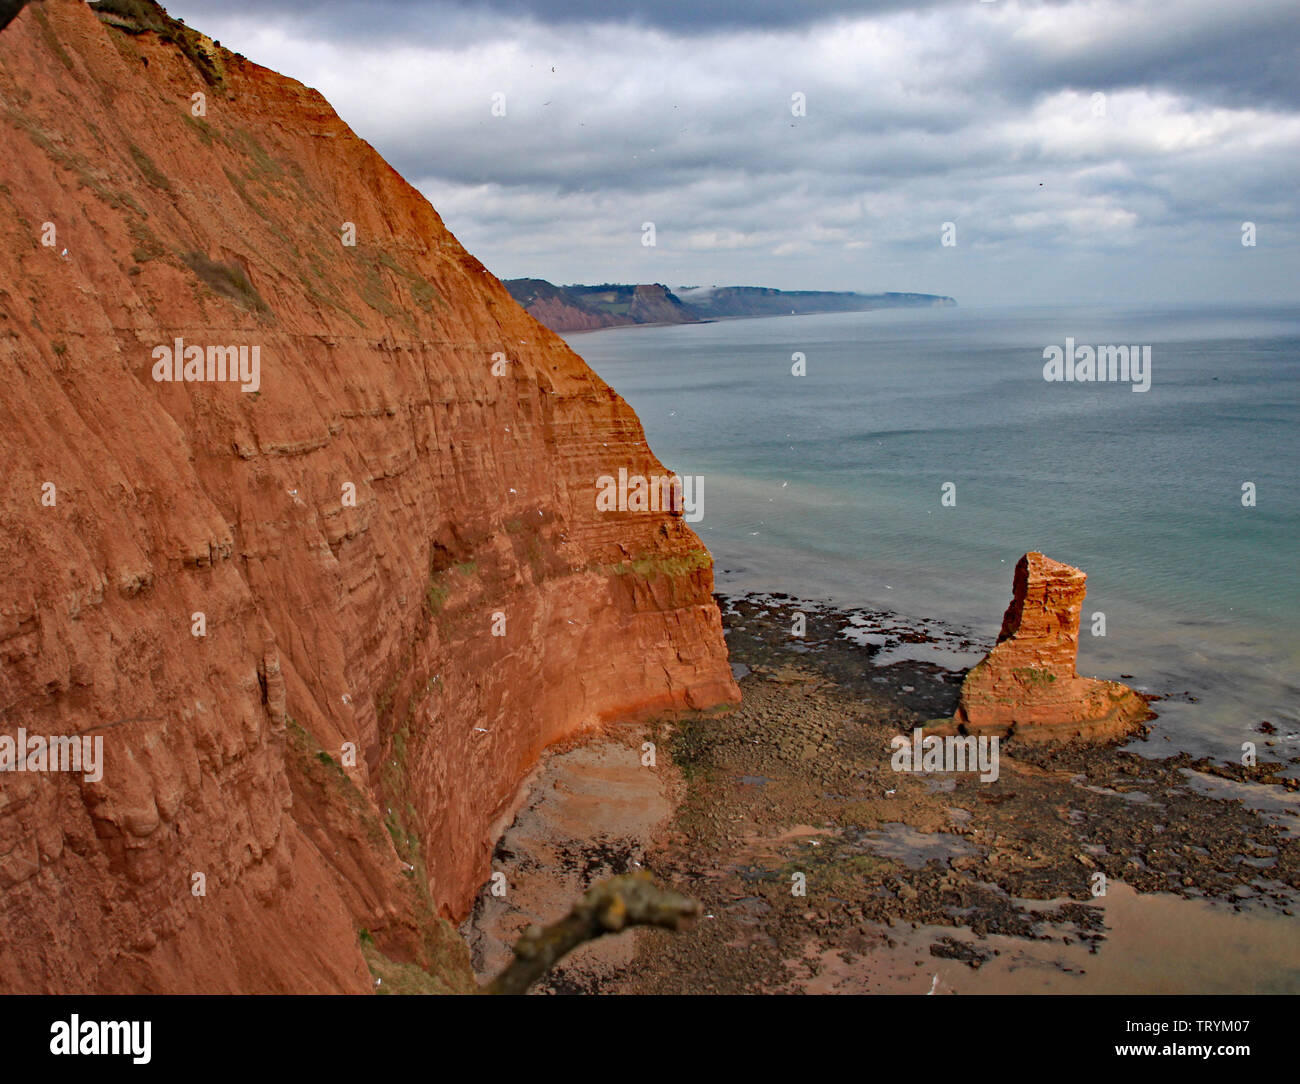 A sandstone sea stack at Ladram Bay near Sidmouth, Devon. Part of the south west coastal path. Stock Photo